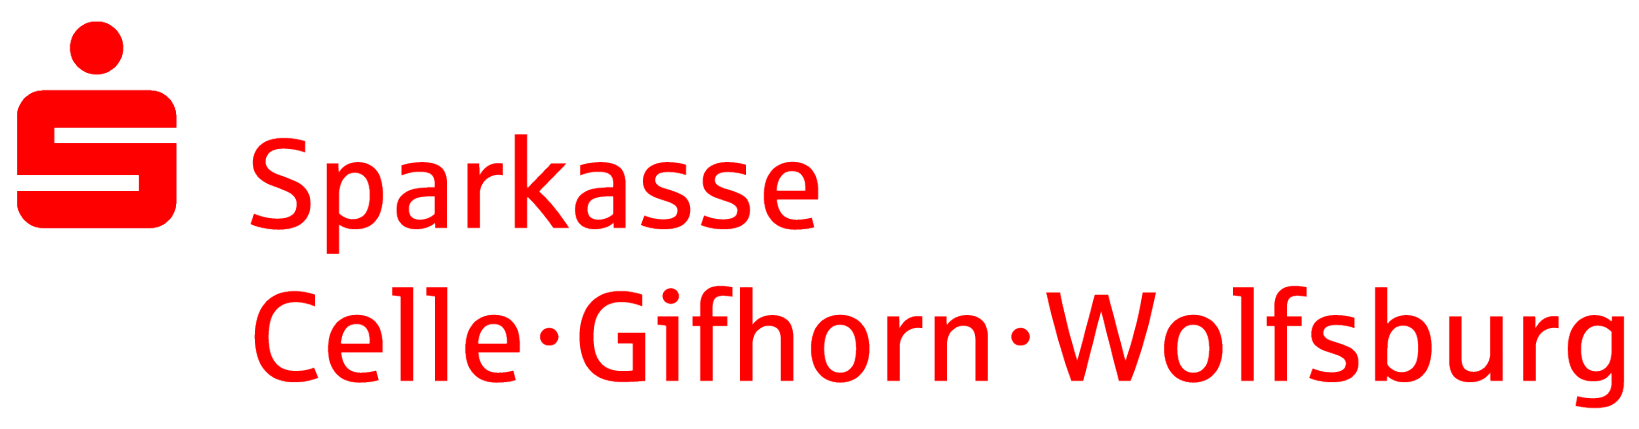 Sparkasse Celle Gif WOB